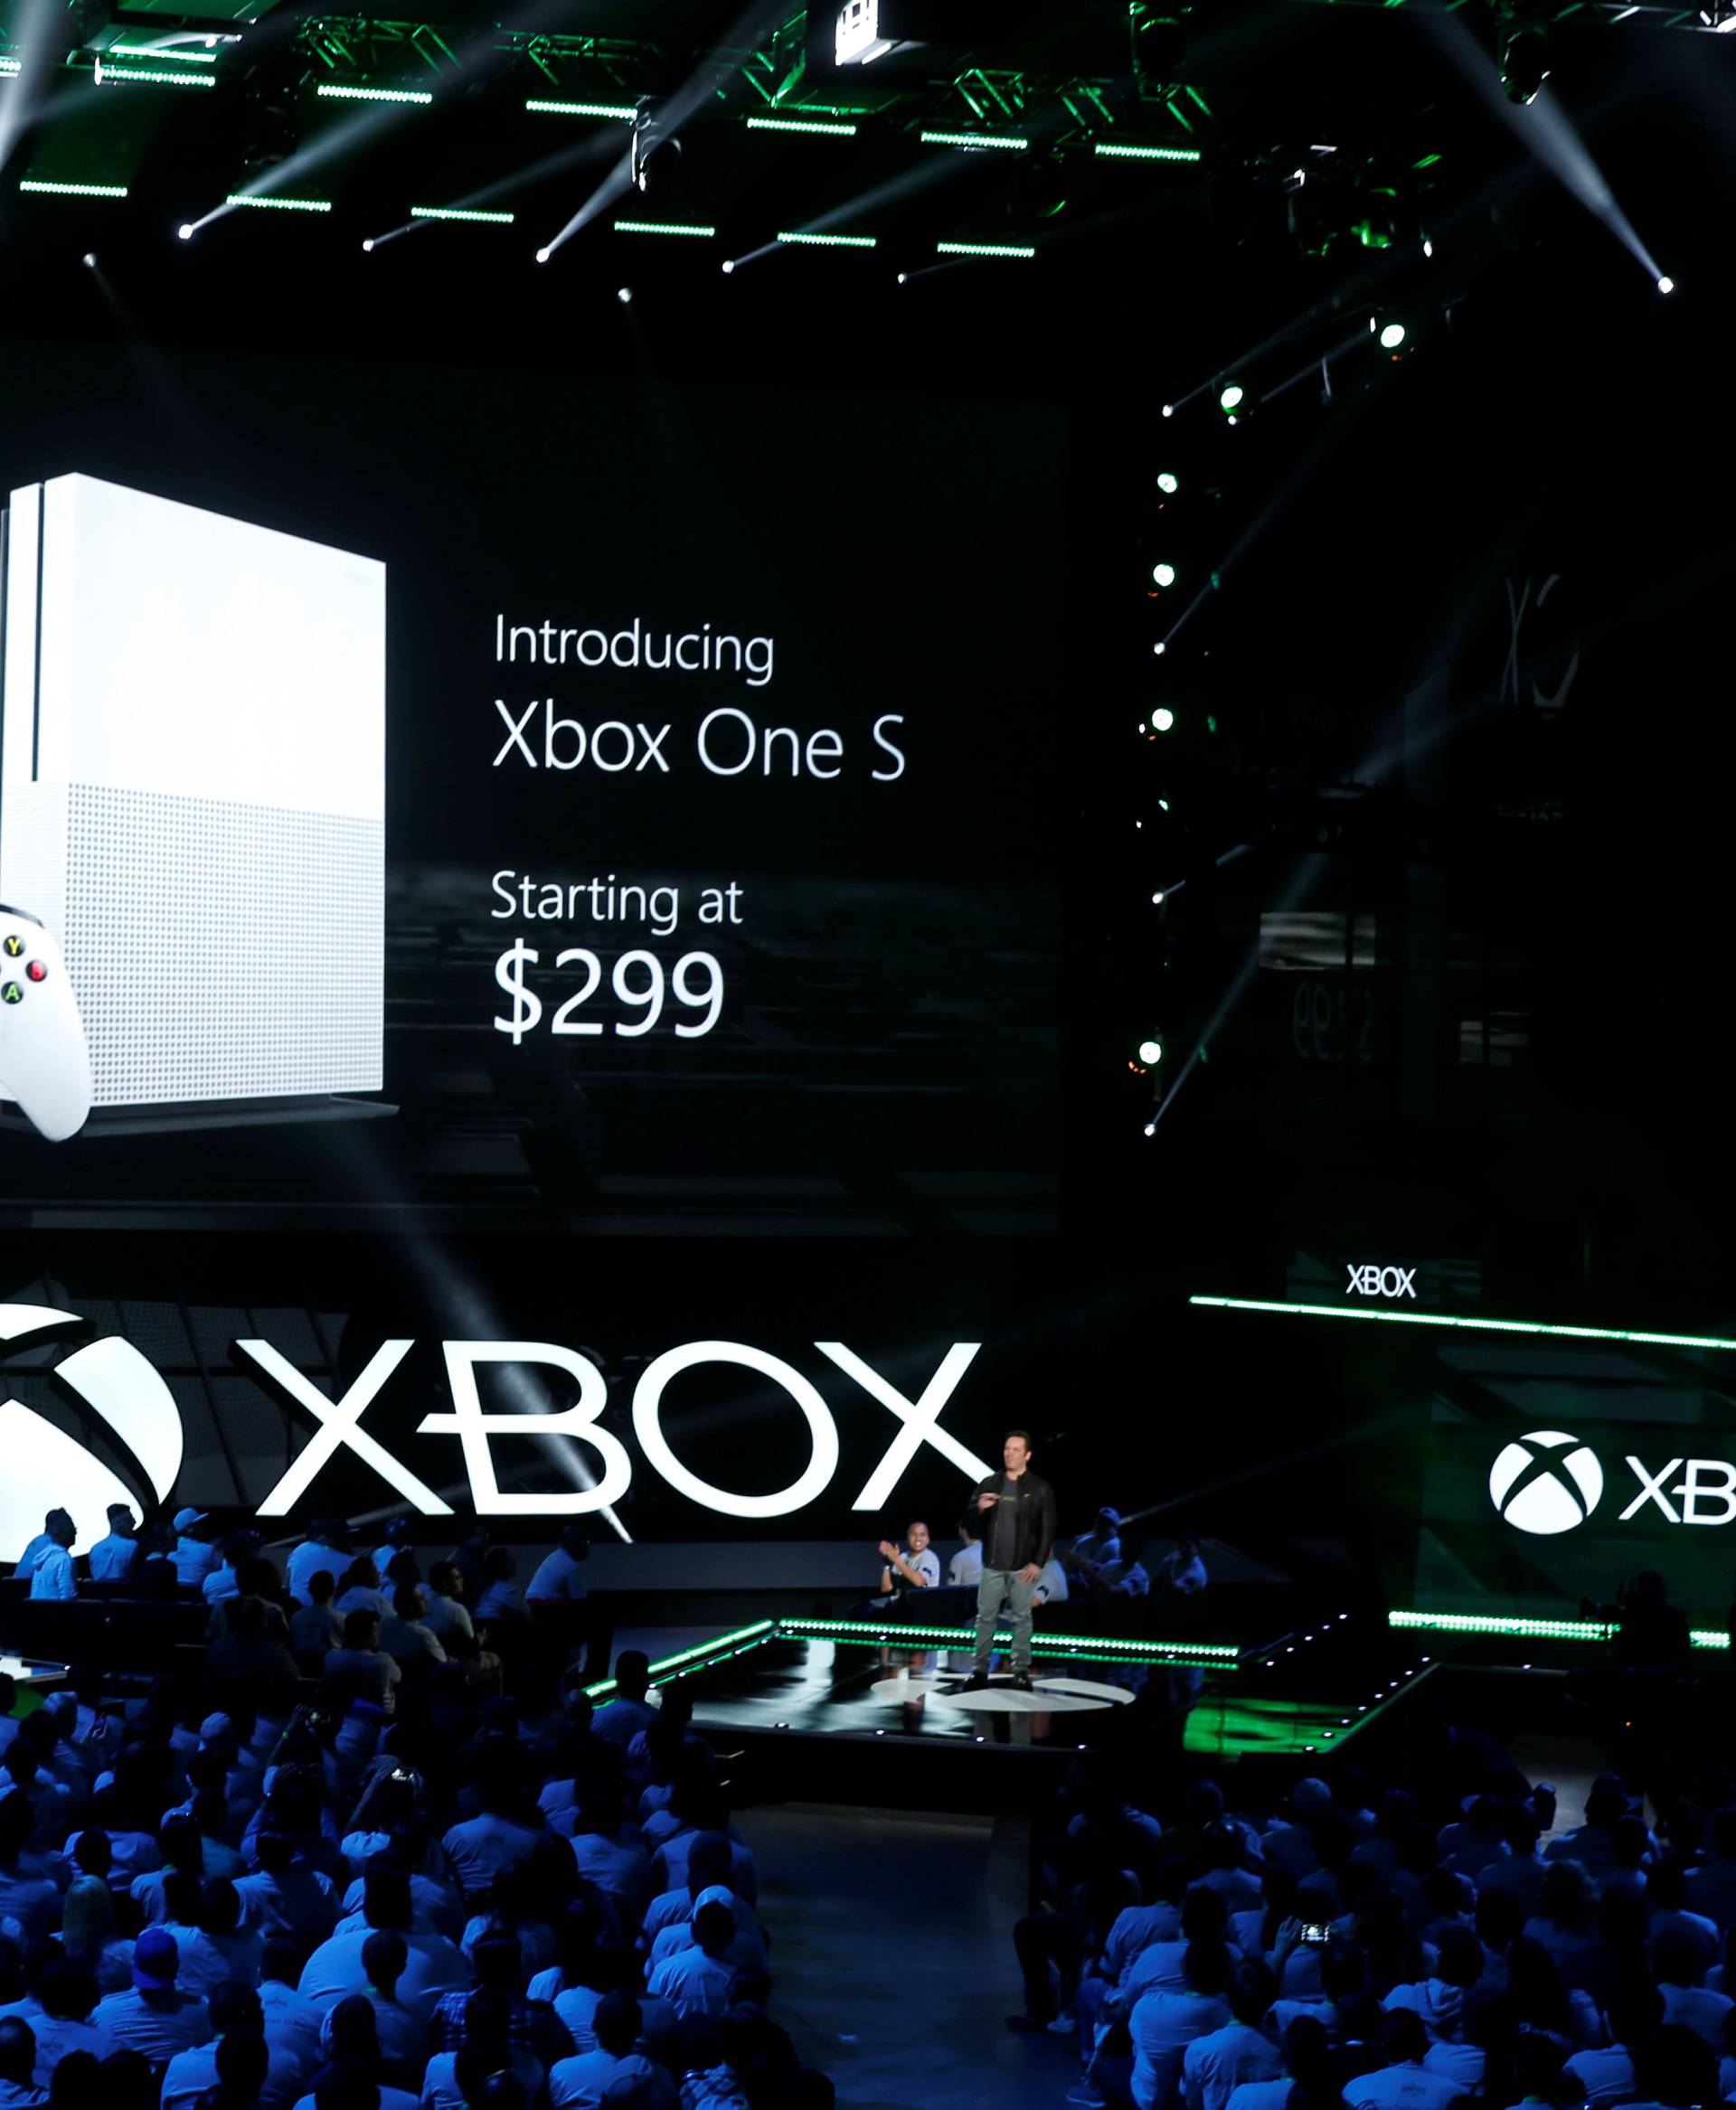 Head of Microsoft Xbox Phil Spencer unveils the Xbox One S console at the Xbox E3 2016 media briefing in Los Angeles